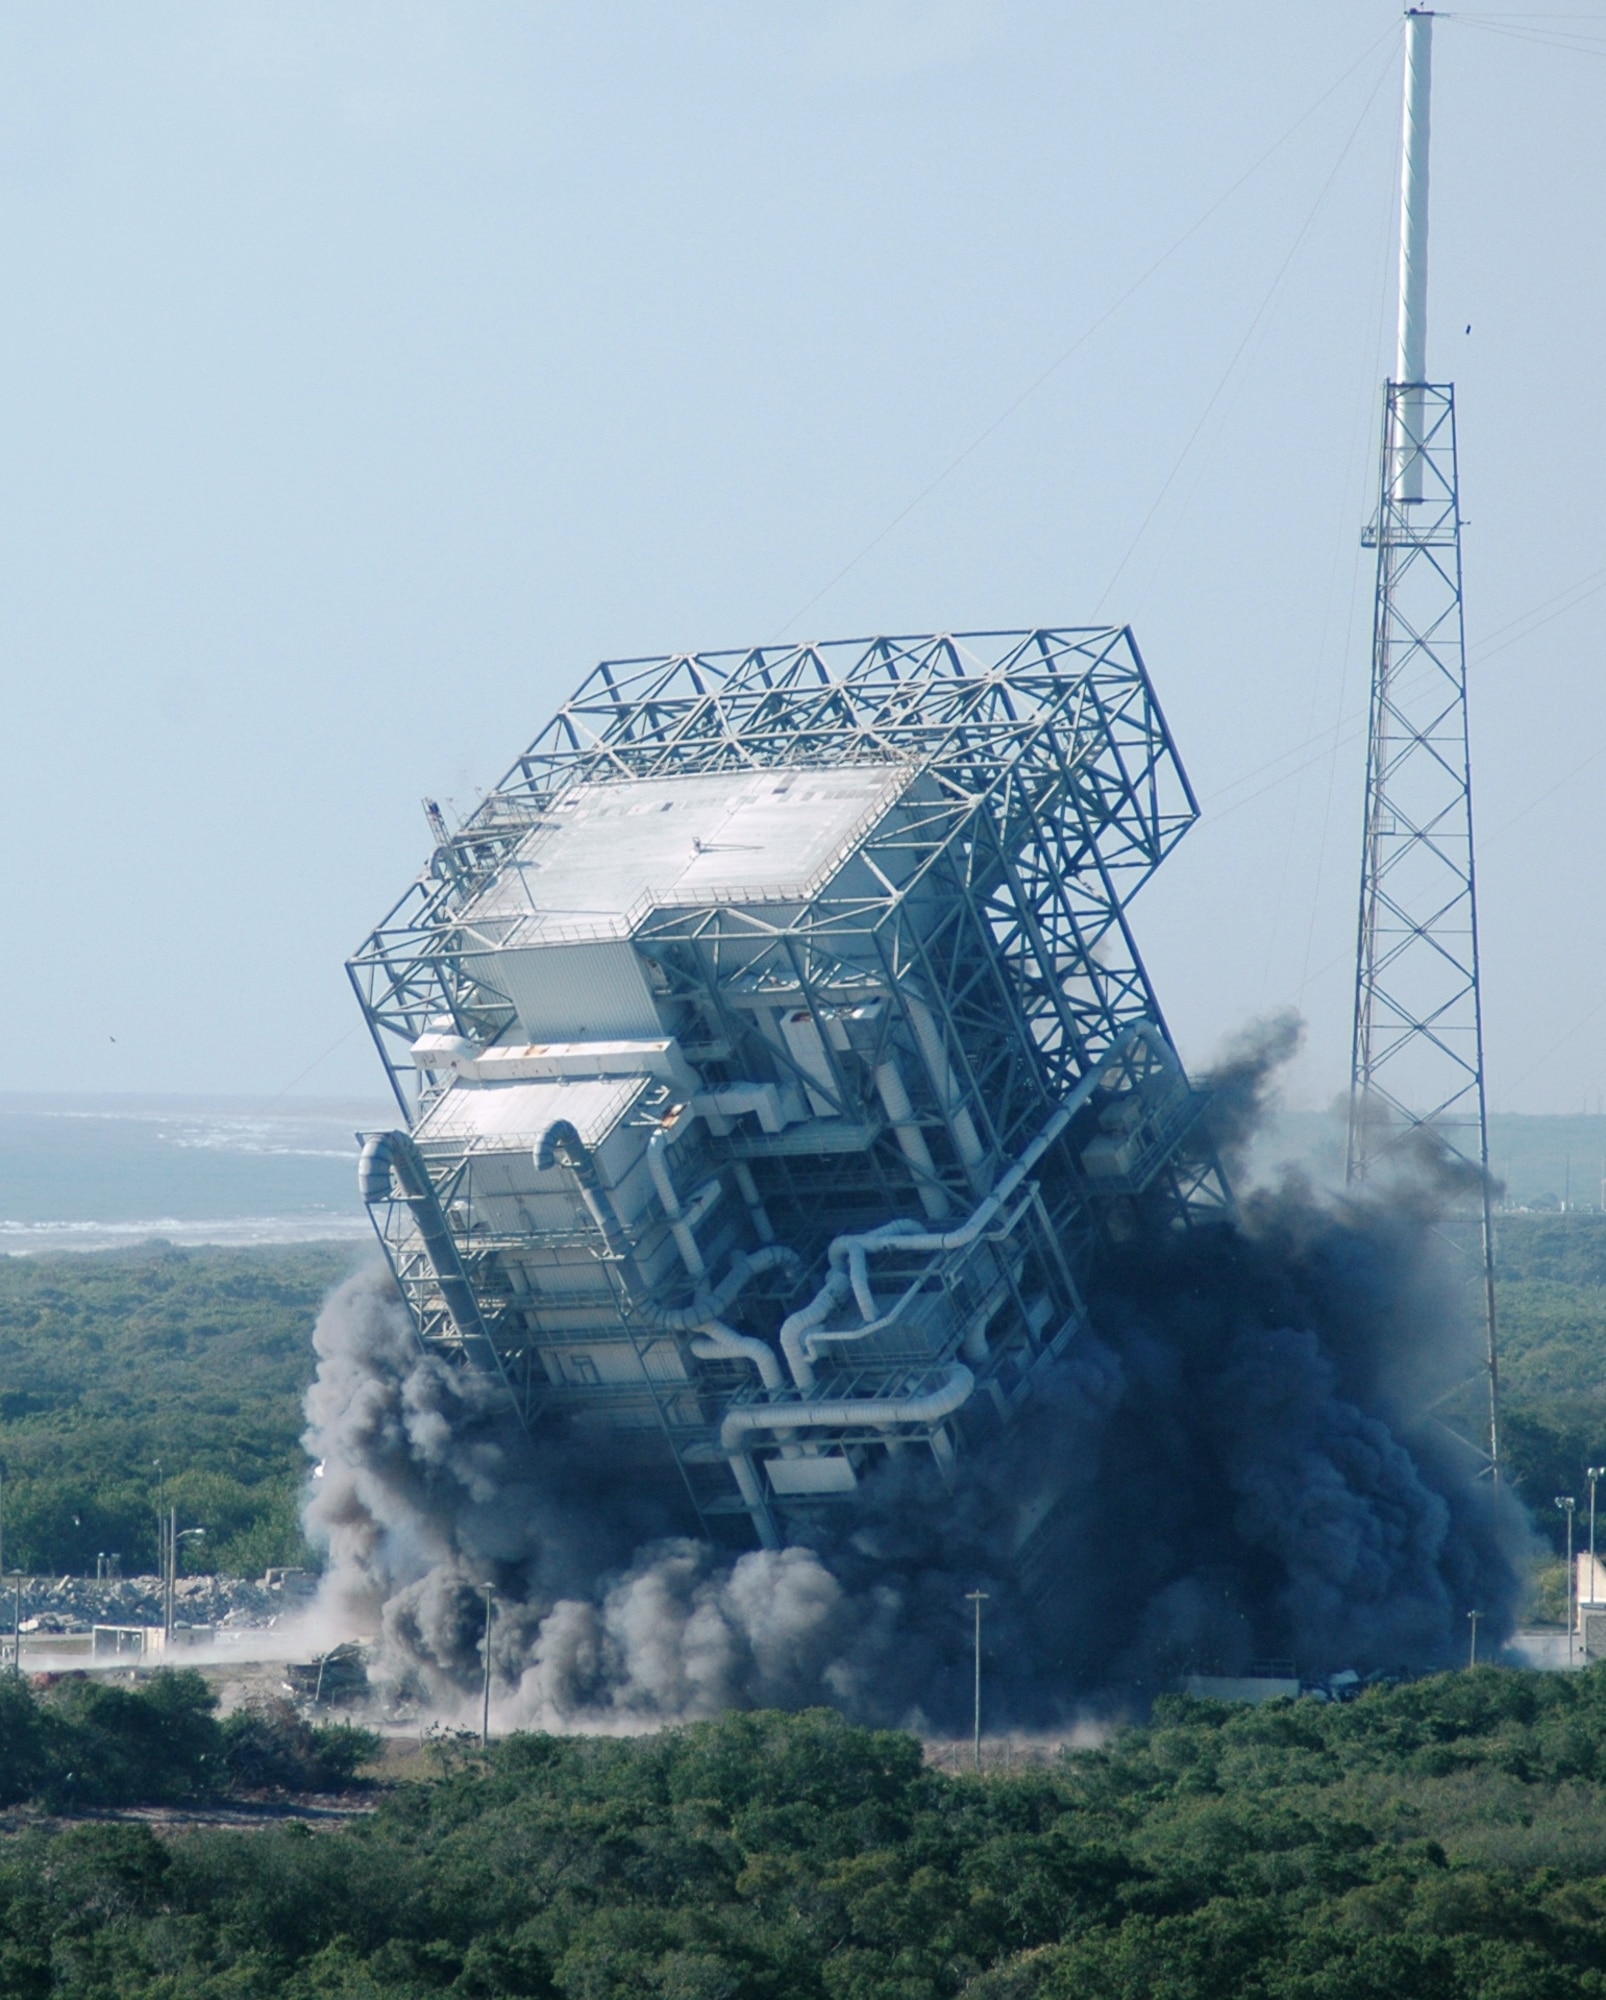 The mobile service tower at Space Launch Complex 40 raises a cloud of dust and smoke as it falls to the ground at Cape Canaveral Air Force Station April 27. The obsolete tower was demolished to make way for new launch programs at Cape Canaveral. (U.S. Air Force photo by Airman 1st Class David Dobrydney)